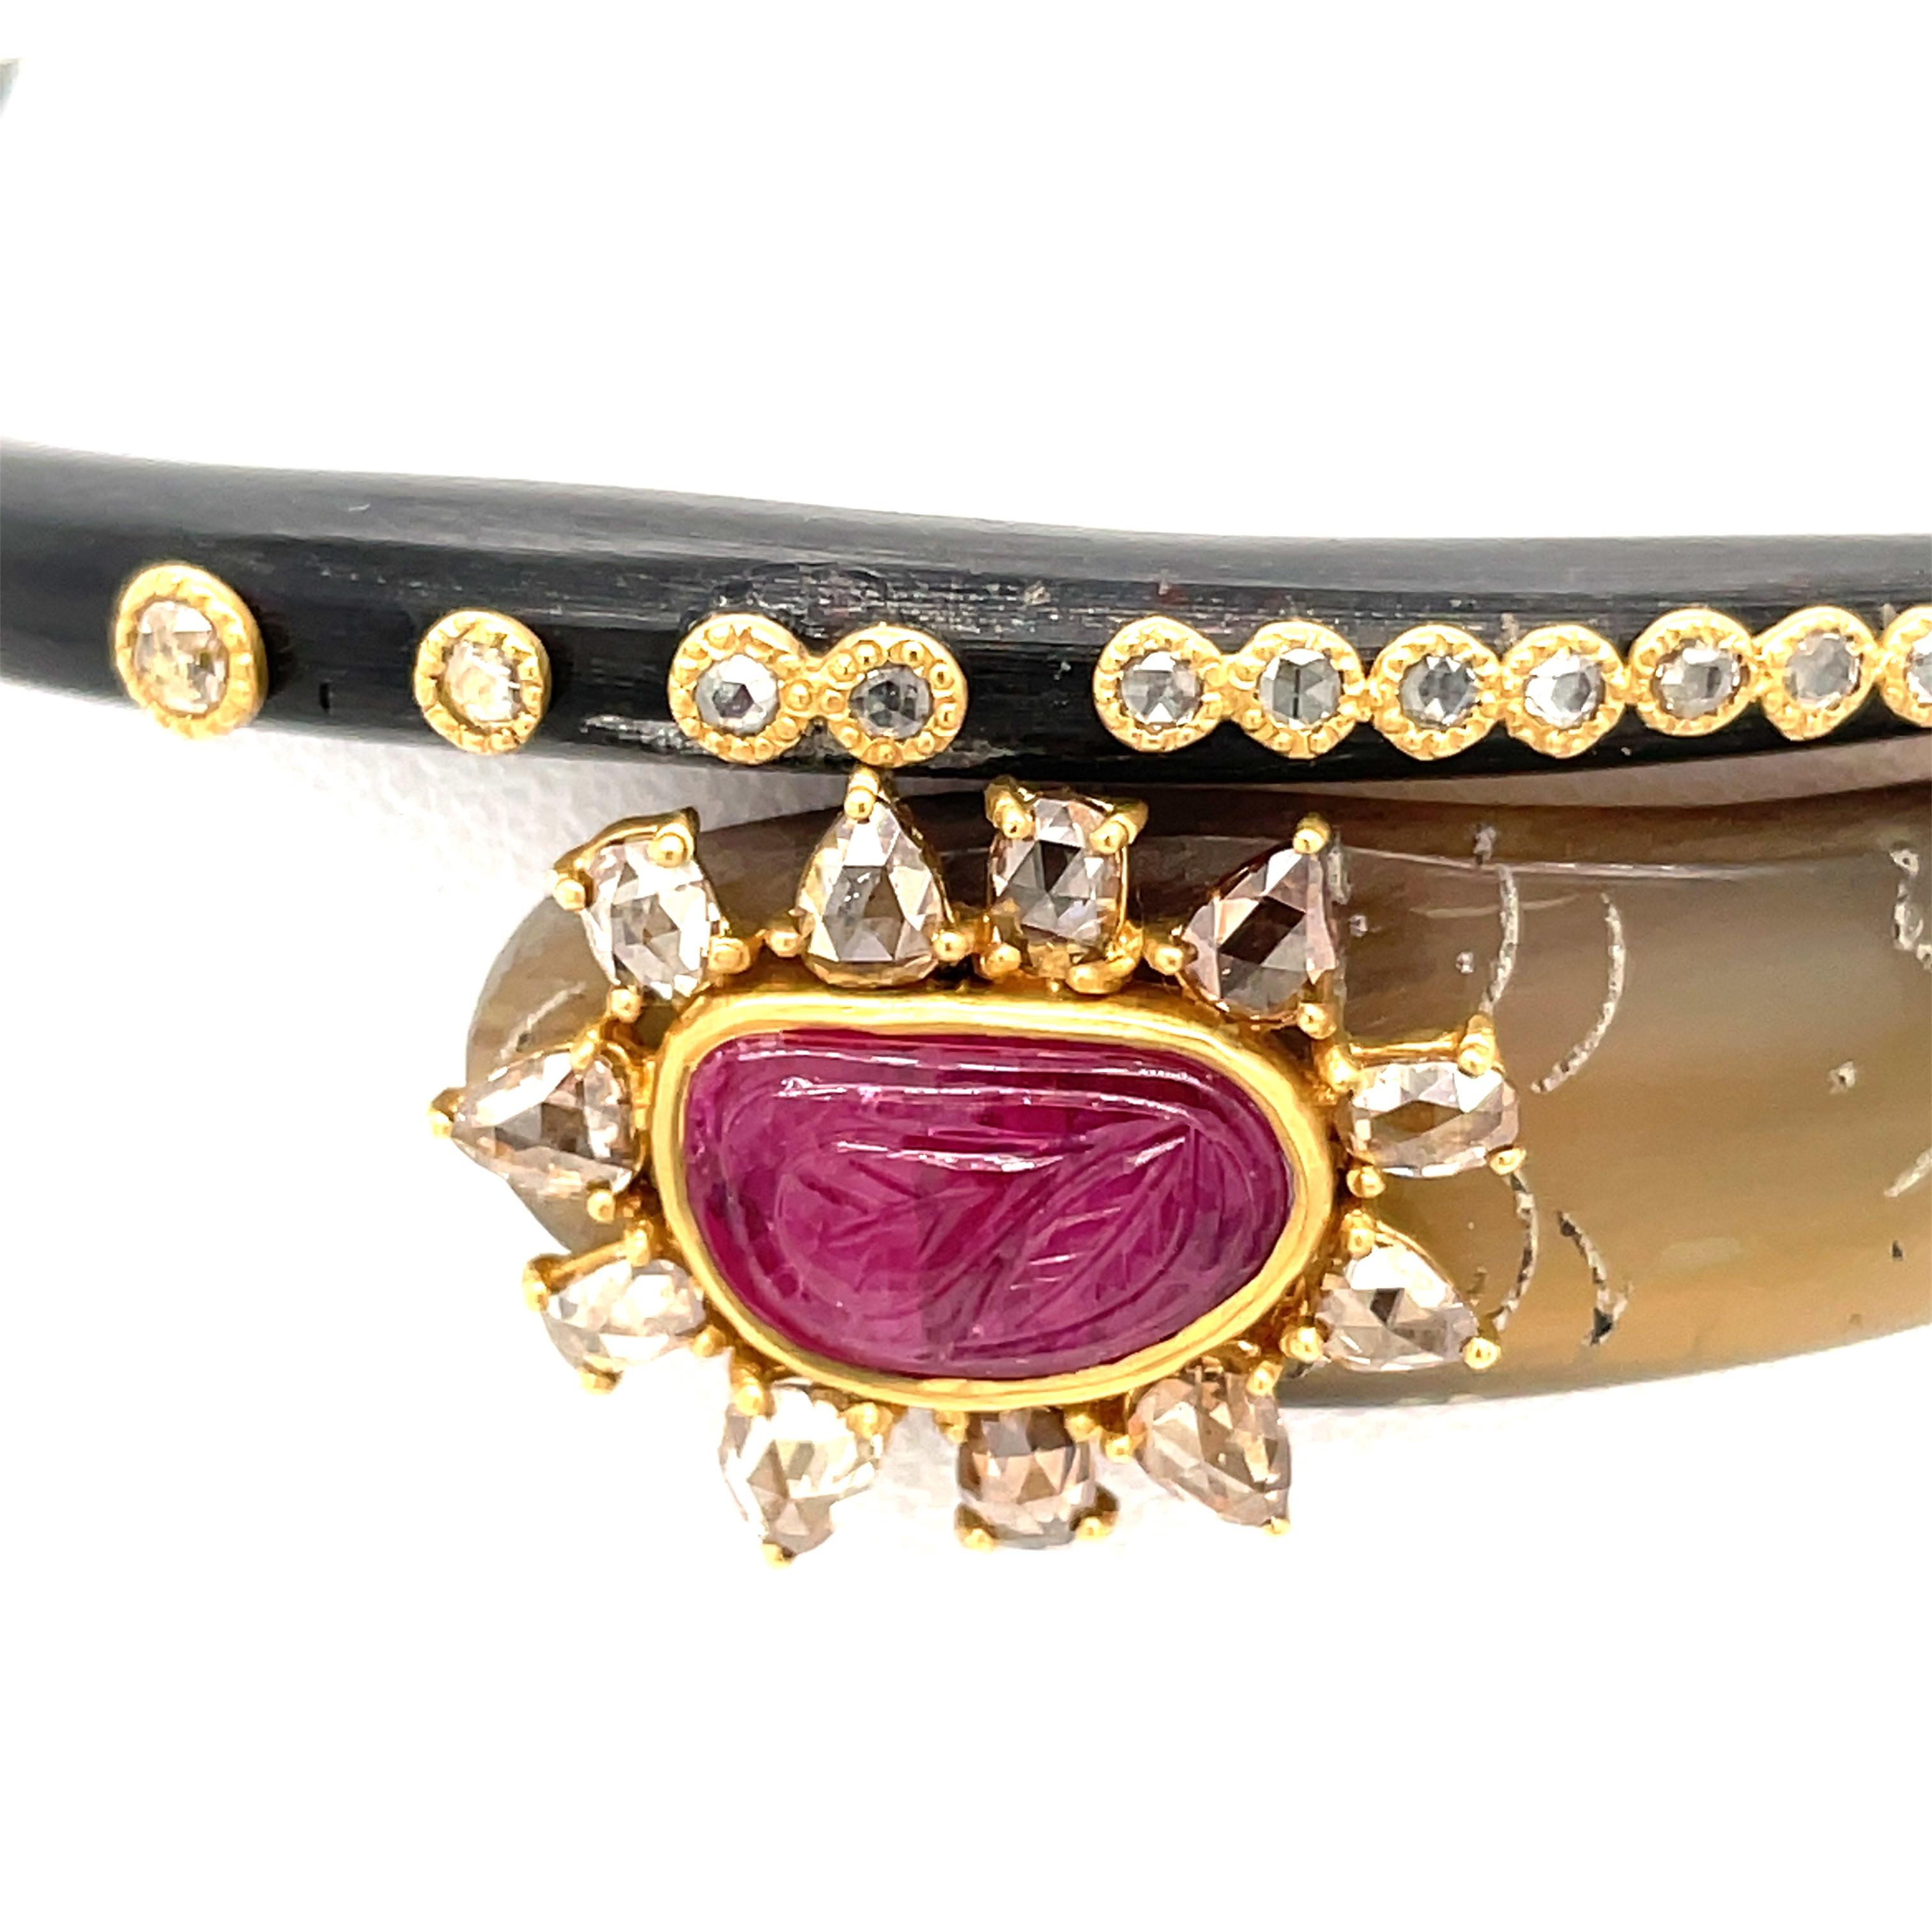 Coomi Horn Bangle with 20K Yellow Gold Accents Rubies and Diamonds.  Fits a 7 inch wrist or smaller.  Slips on to wrist.  
29 Diamonds and One Carved Ruby
Stamped Coomi 20K 